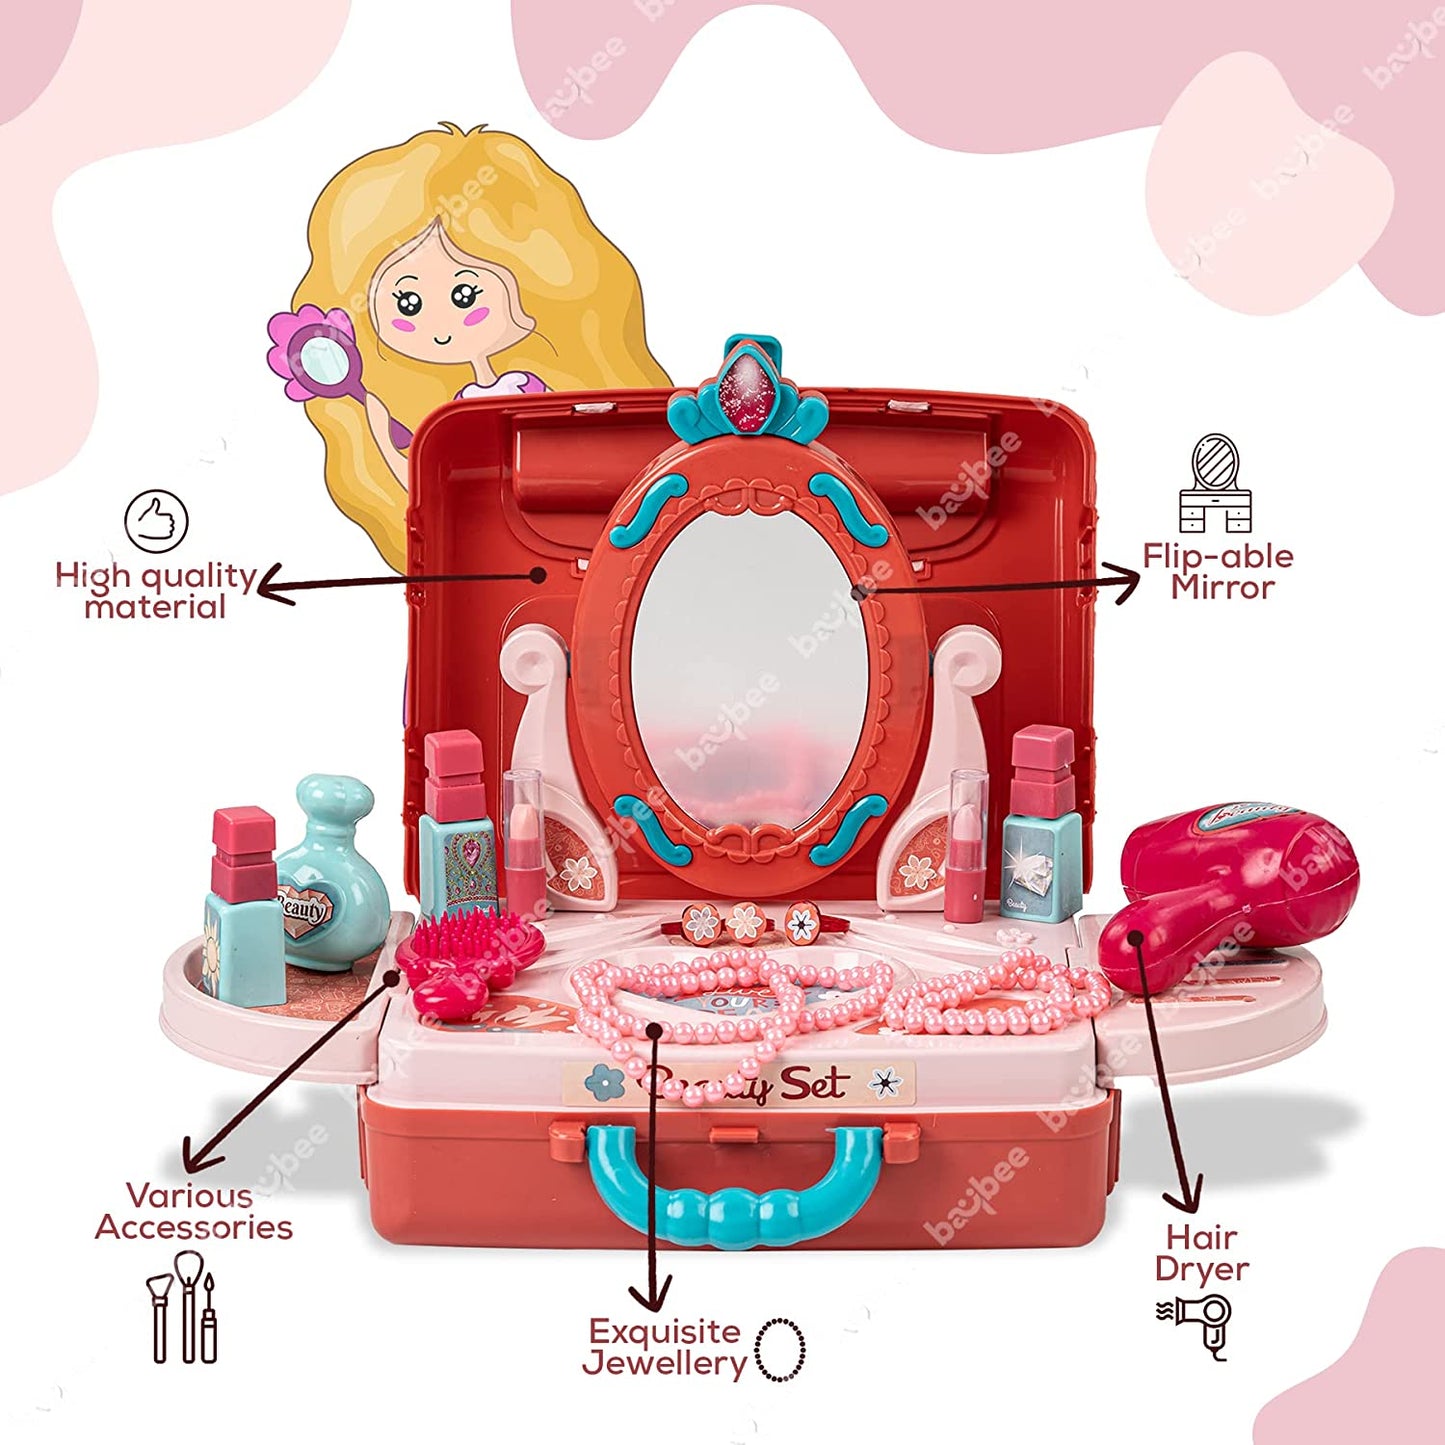 Baybee 3 in 1 Kids Beauty Makeup Kit Set Toys for Girls, Convertible Dressing Table & Suitcase